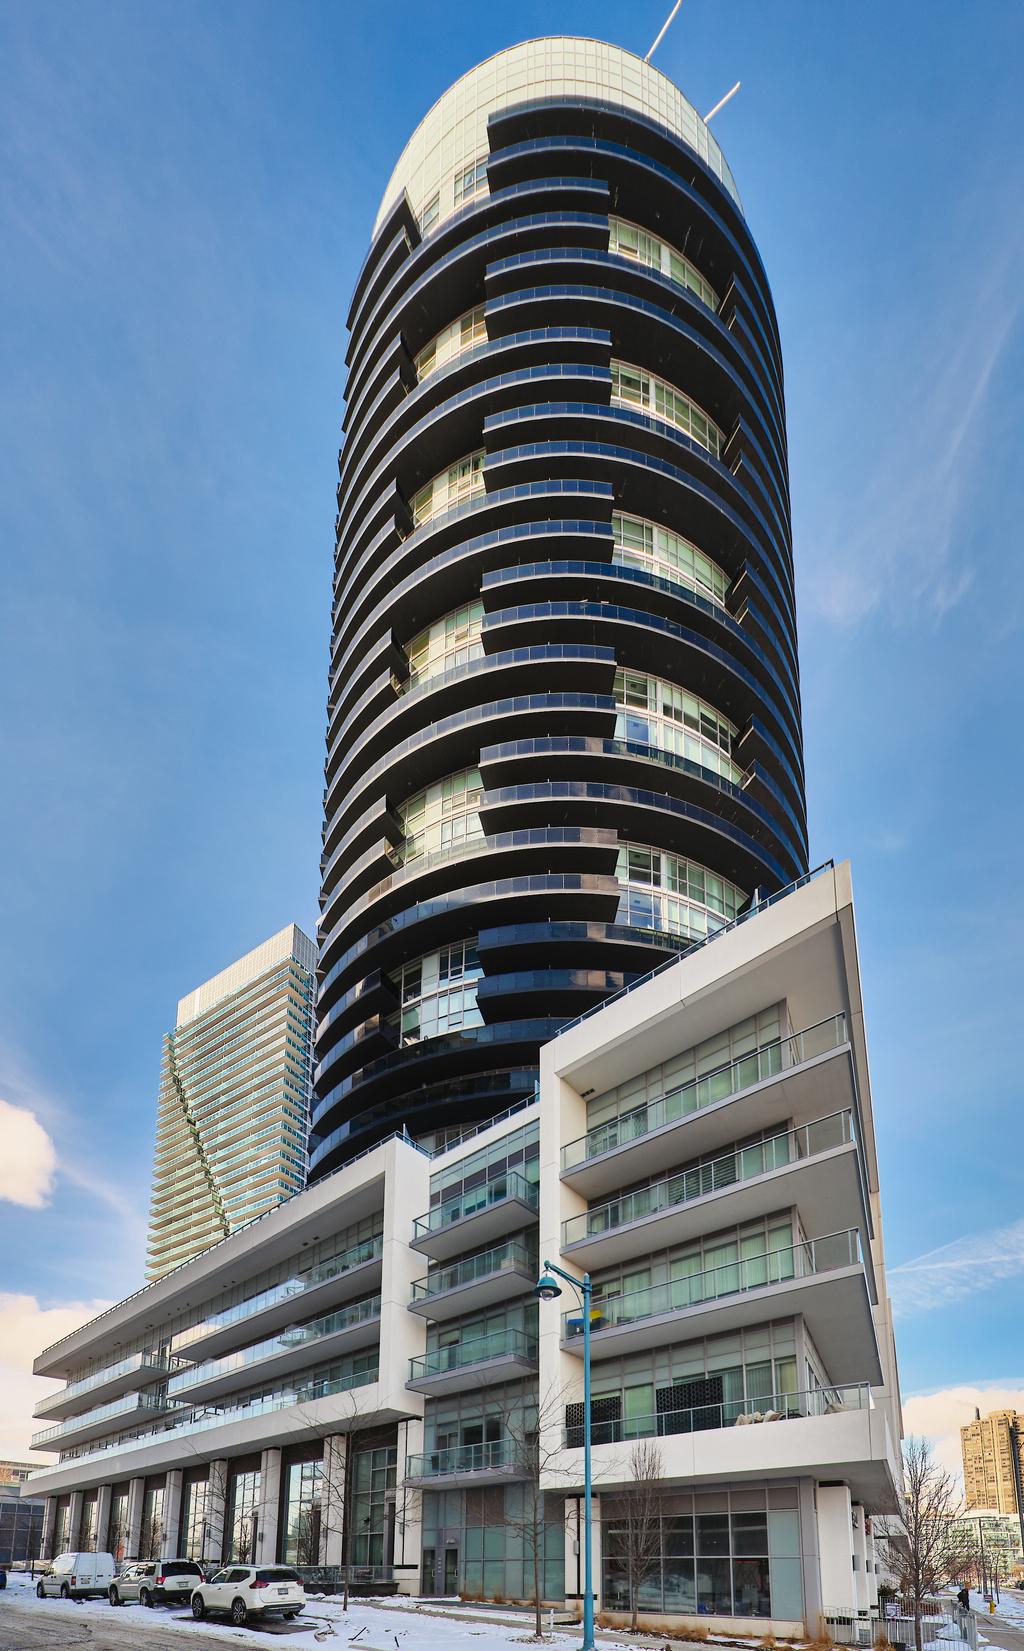 Waterscapes Waterscapes, 80 Marine Parade Drive, is a landmark luxury condominium residence that consists of a 30-storey elliptical tower resting on a 4-storey podium that uniquely showcases the